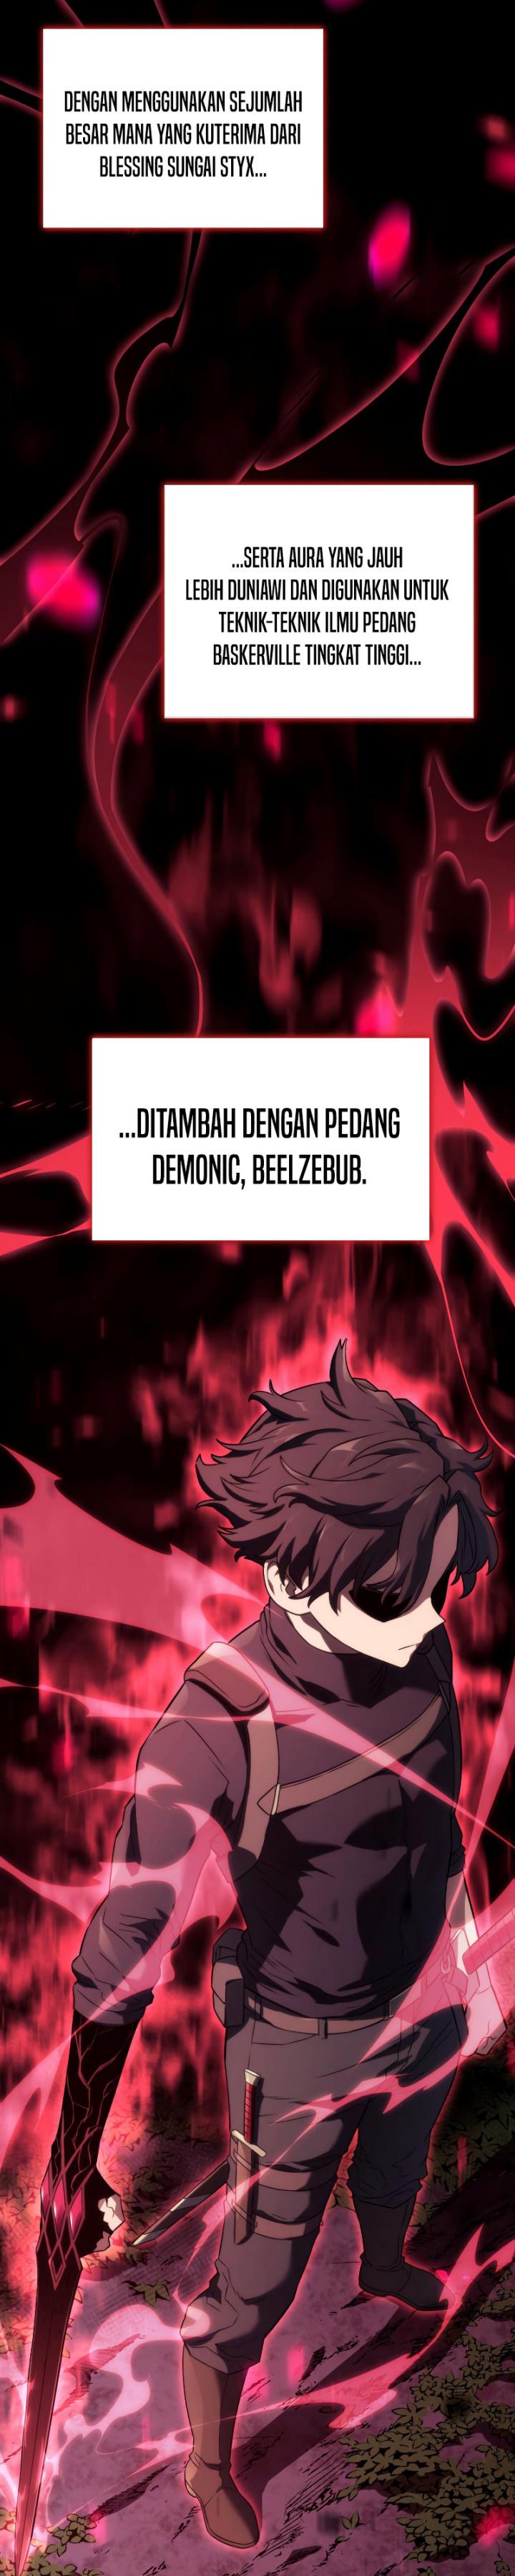 Revenge Of The Iron-blooded Sword Hound Chapter 31